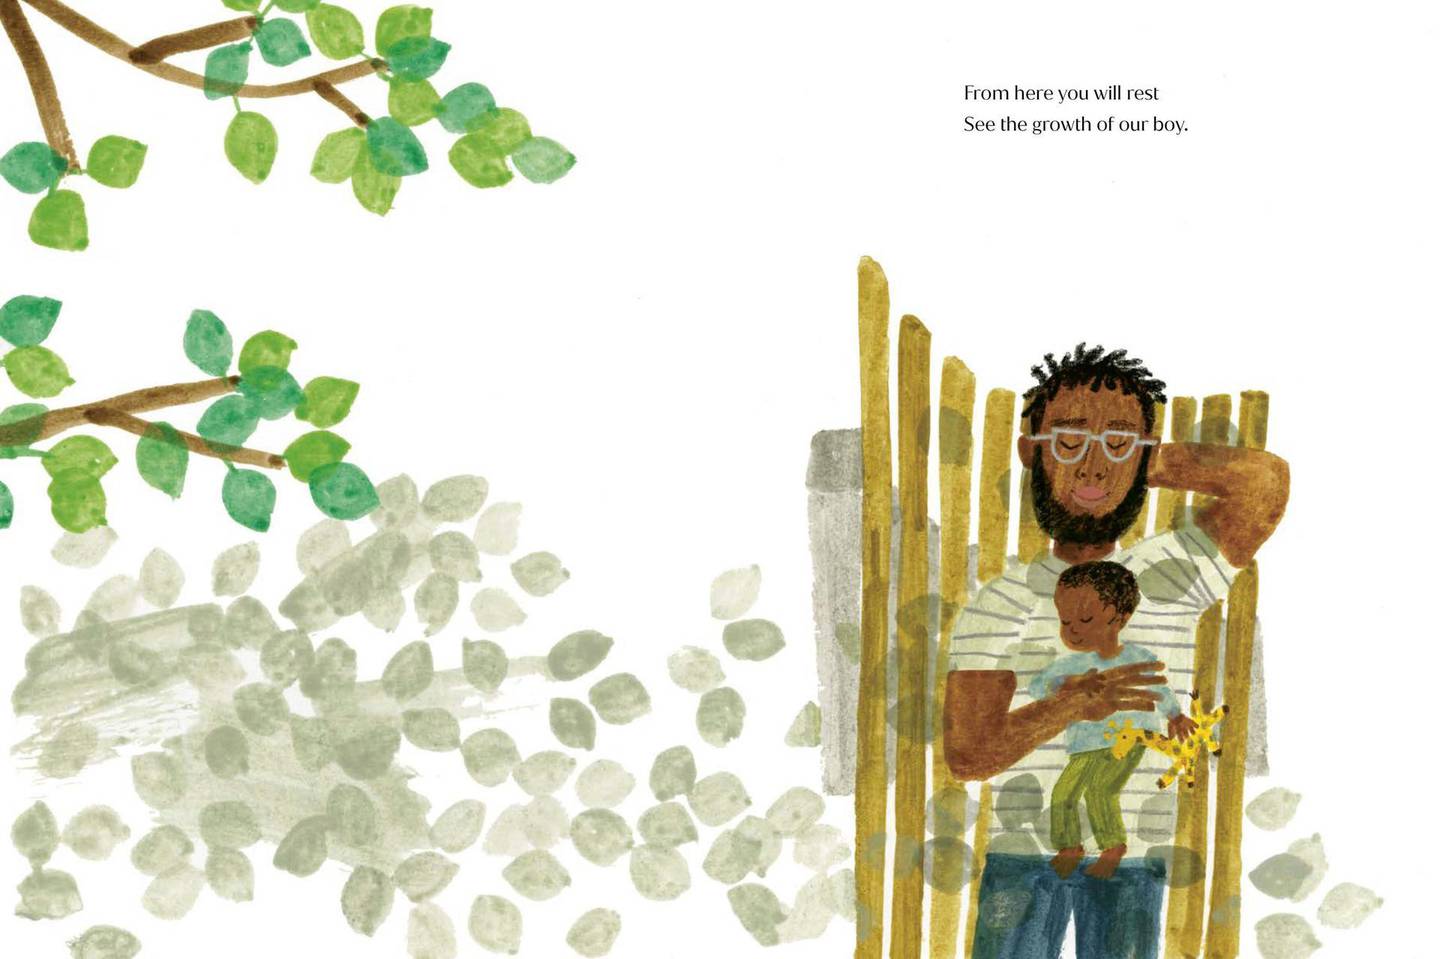 In this photo provided by Random House on Tuesday, May, 4, 2021, of an interior spread from The Bench, the debut children's book written by Meghan, the Duchess of Sussex, with illustrations by artist Christian Robinson. Meghan, the Duchess of Sussex, is releasing her first children's book next month. Random House Childrenâ€™s Books announced Tuesday, May 4, 2021 that â€œThe Bench,â€ a story about the moments a diverse group of fathers and sons share, will be out on June 8. Meghan will also narrate an audiobook edition. (Penguin Random House via AP)